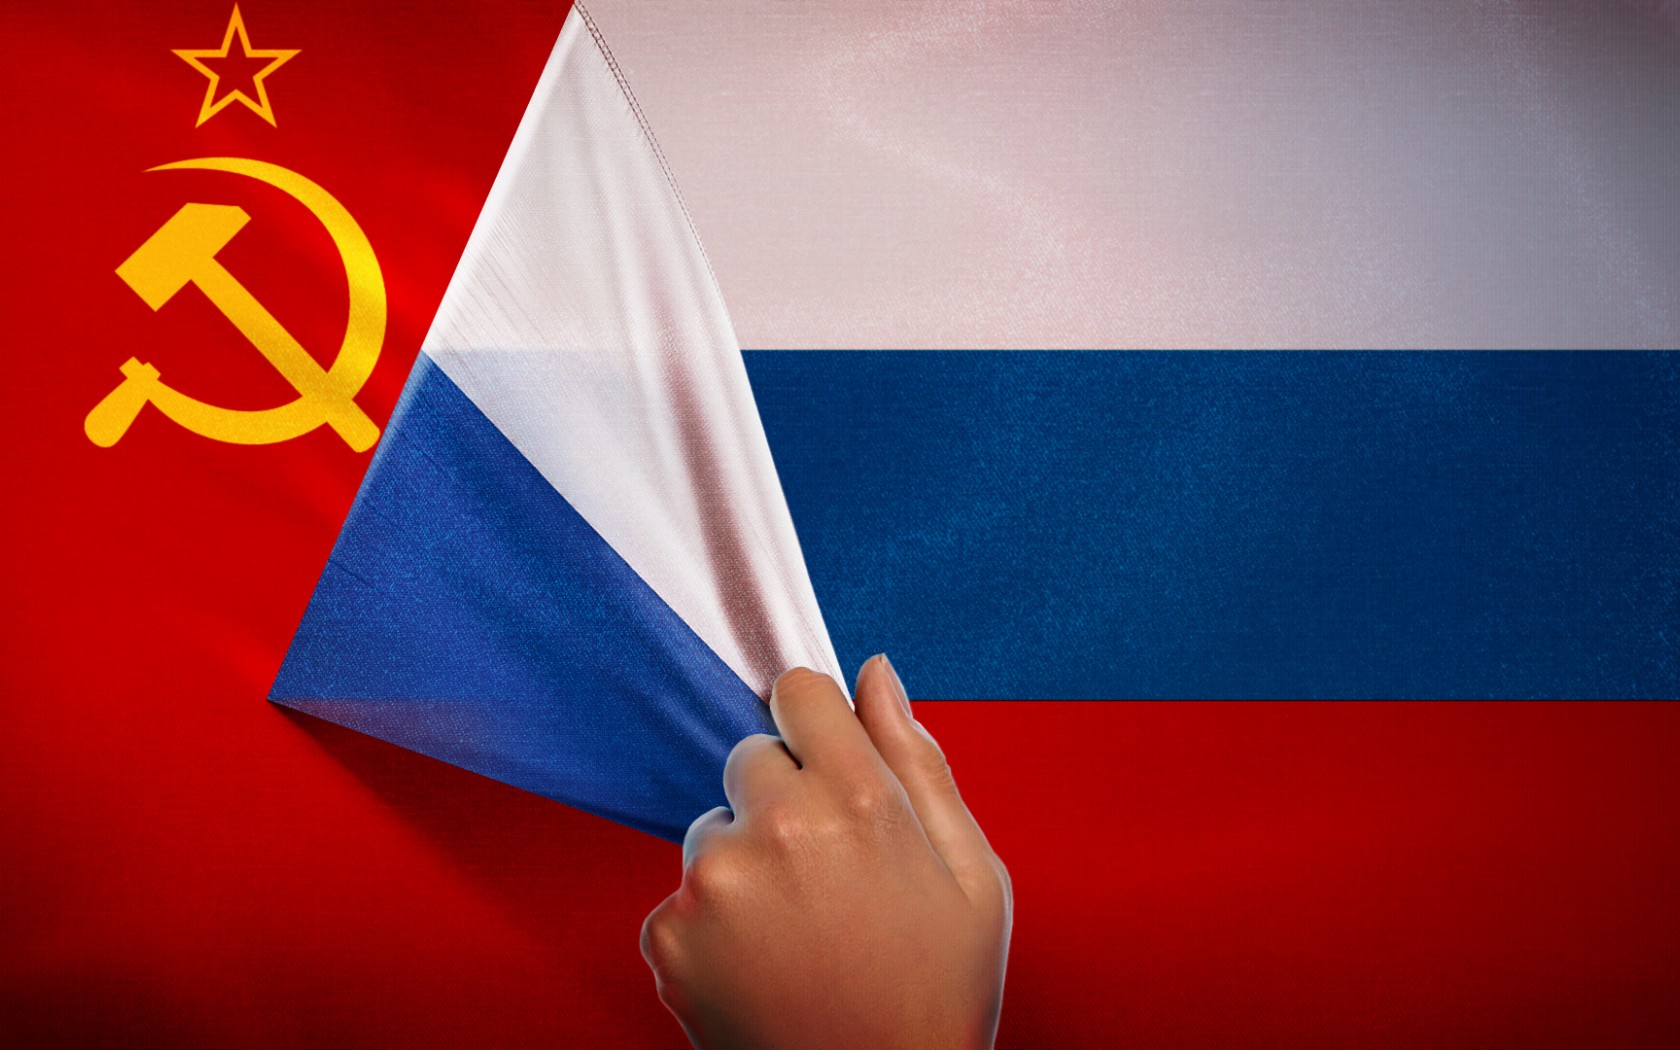 Most Russians like Soviet symbols but lack knowledge about Soviet past – and that is dangerous